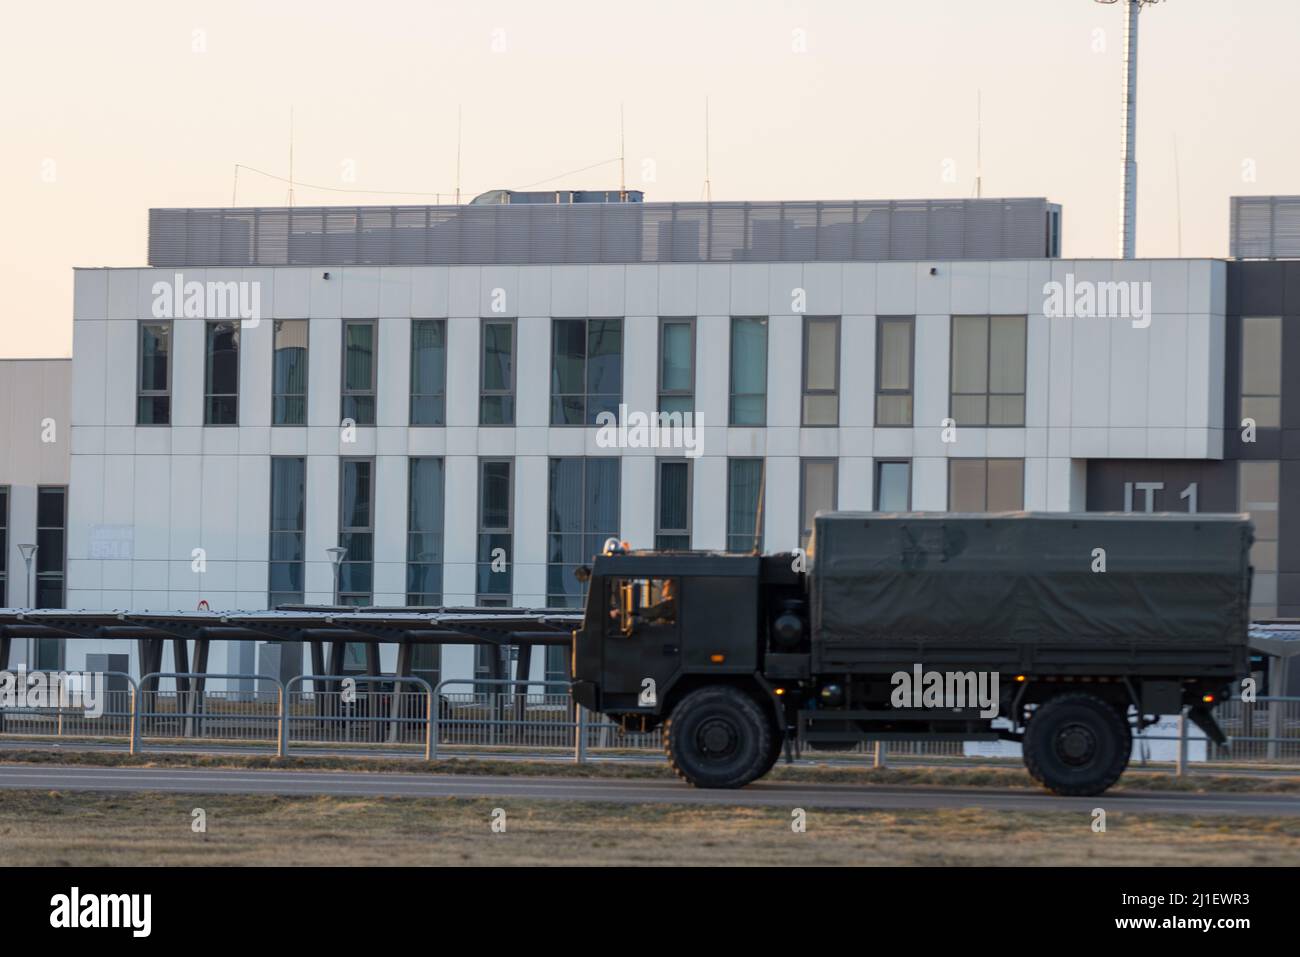 The United States and Nato build up military assets at the Border town of Rzeszow close to the Ukrainian border, in Rzeszow, Subcarpathian Voivodeship Poland on March 24, 2022.  On February 24, 2022 Russian forces invaded Ukraine. (Photo by Simon Jankowski/Sipa USA) Stock Photo